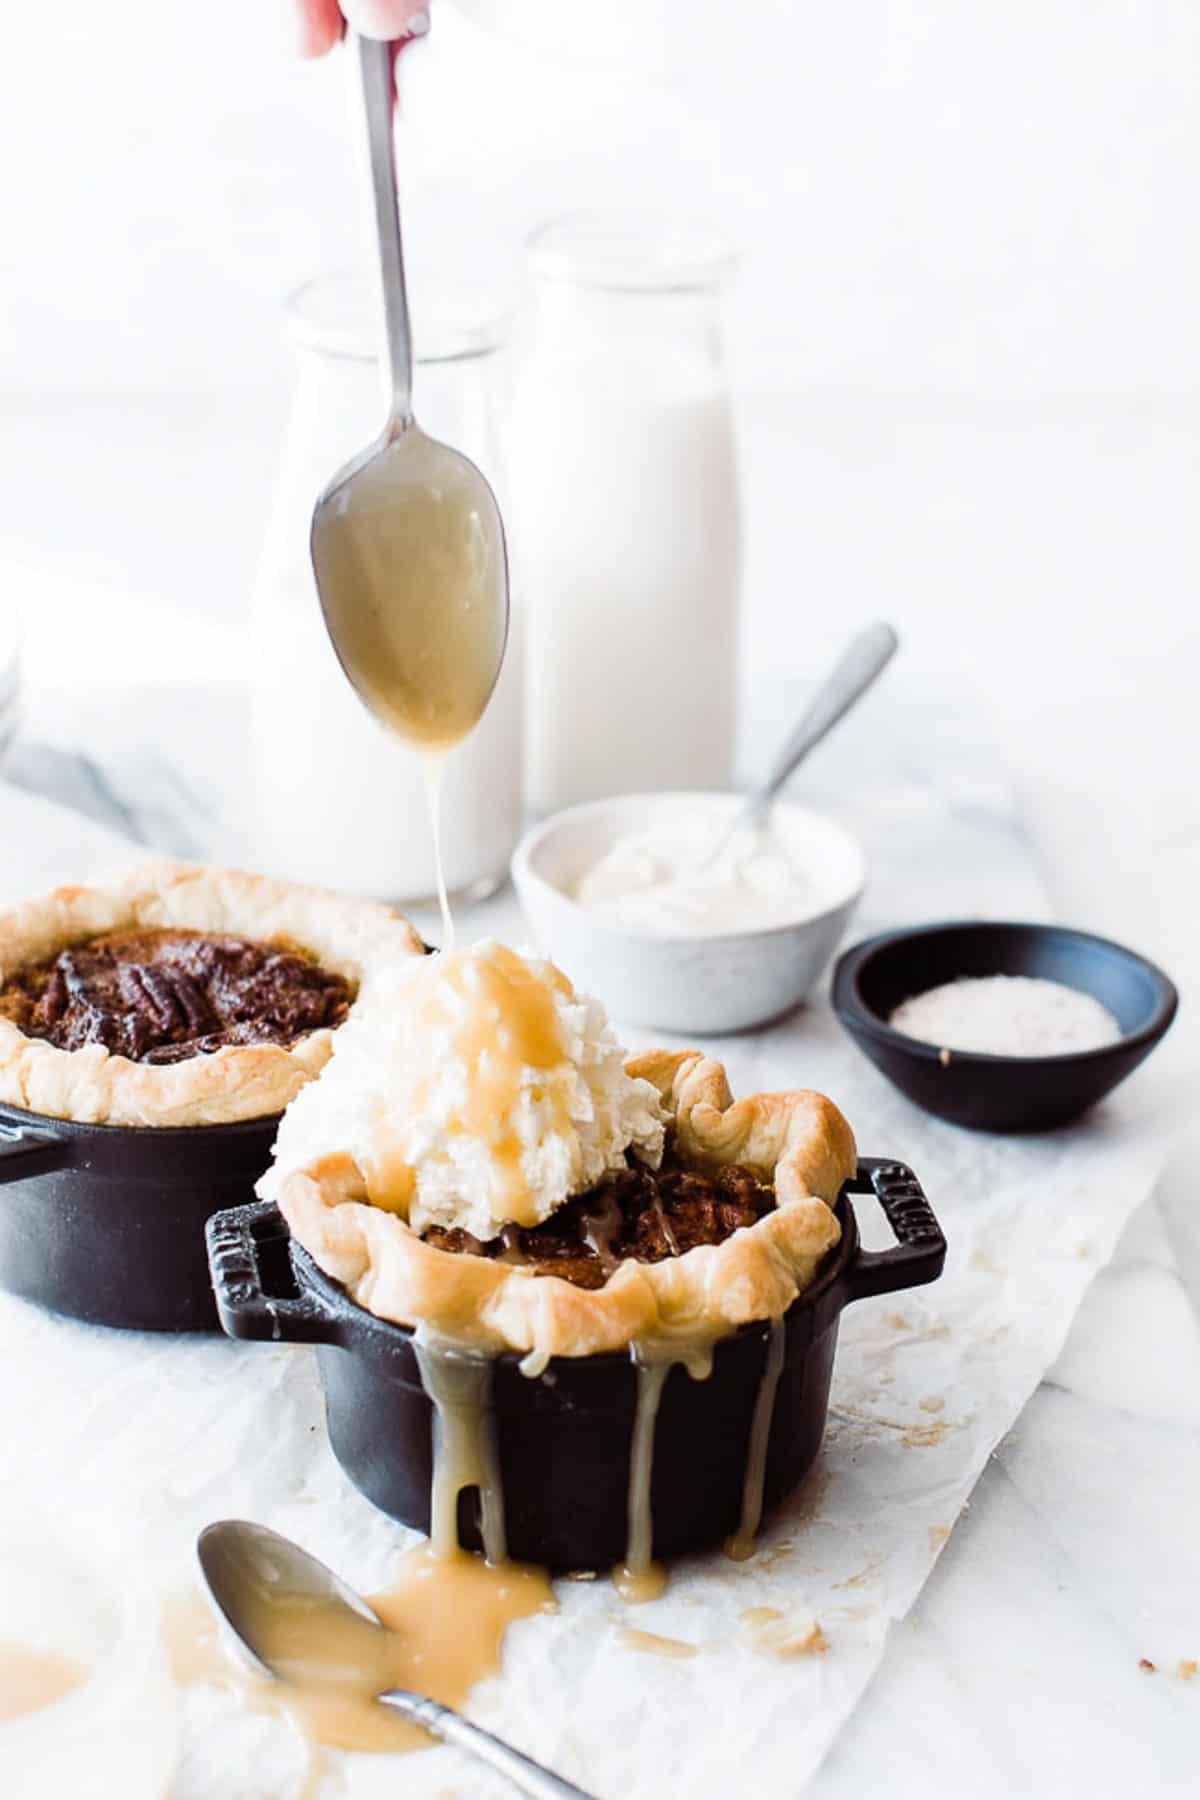 spoon drizzling caramel sauce over the individual pies